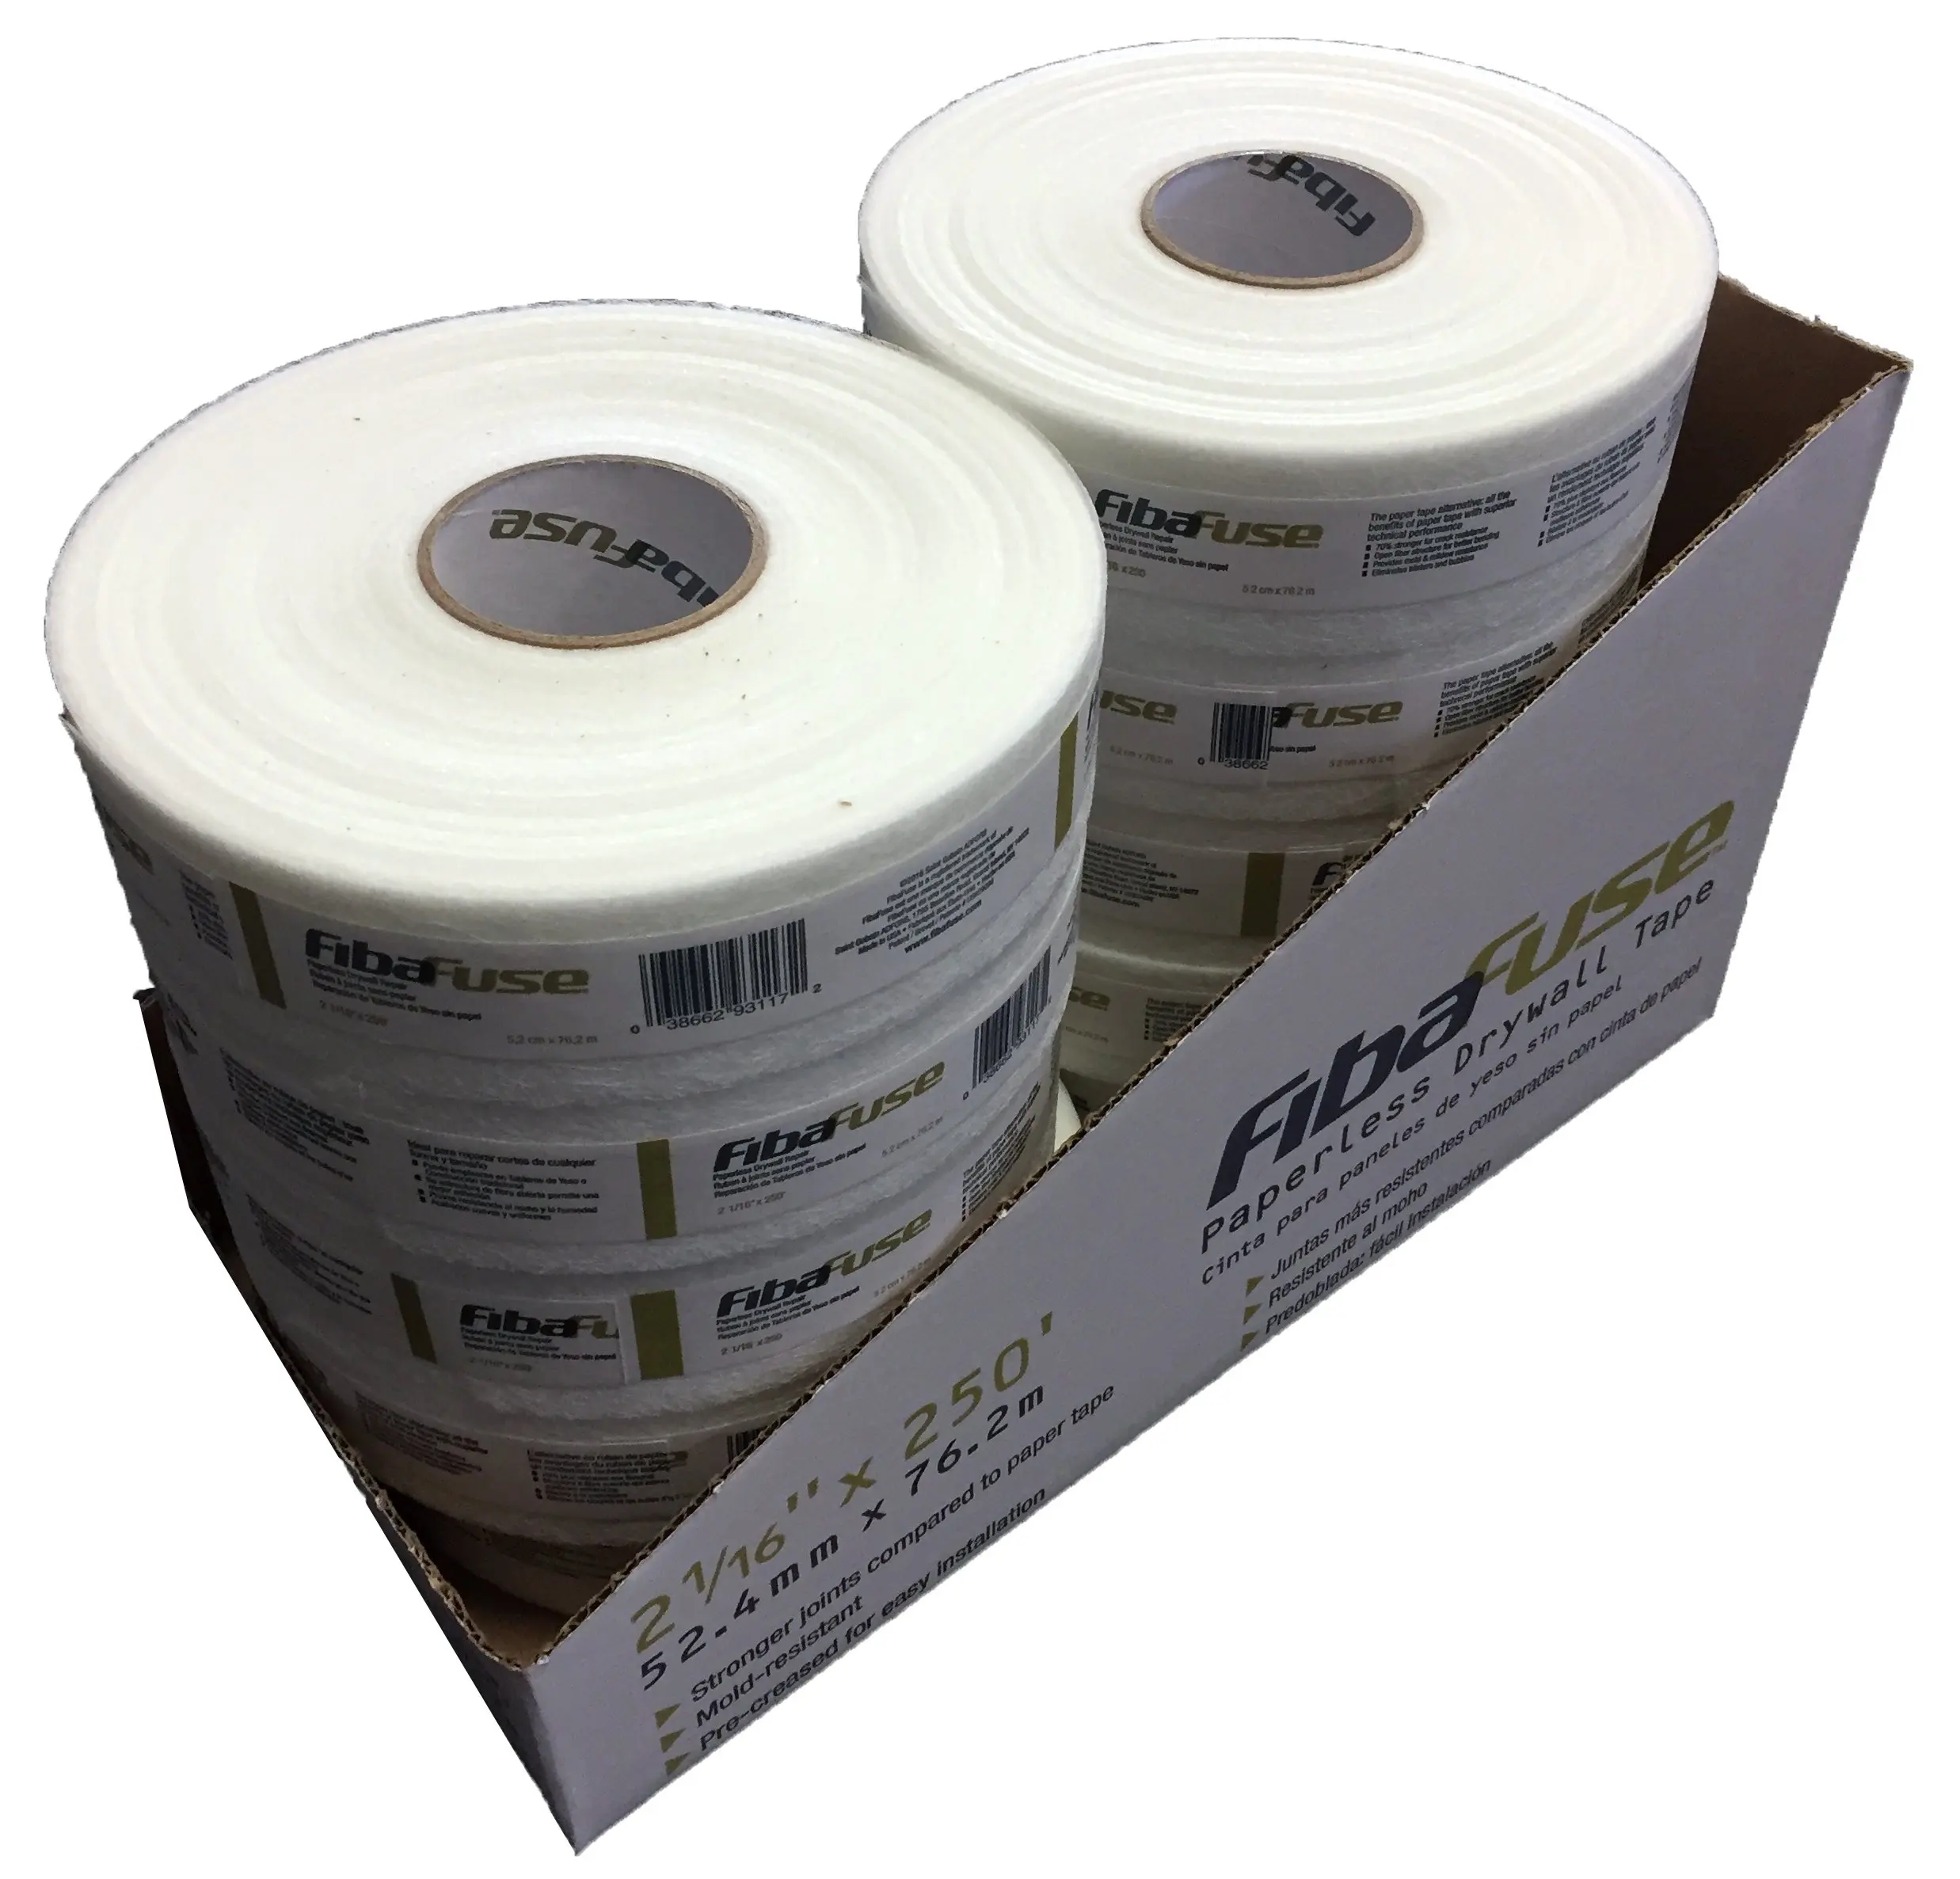 TapeCase 1350F-1 1.75 x 72yd-Black Polyester Film 3M Flame-Retardant Tape 1350F-1 266 Degrees F Performance Temperature 72 yd Length 0.0025 Thickness 1.75 Width 0.0025 Thickness 1.75 Width 3M 1350F-1 1.75 x 72yd-Black 